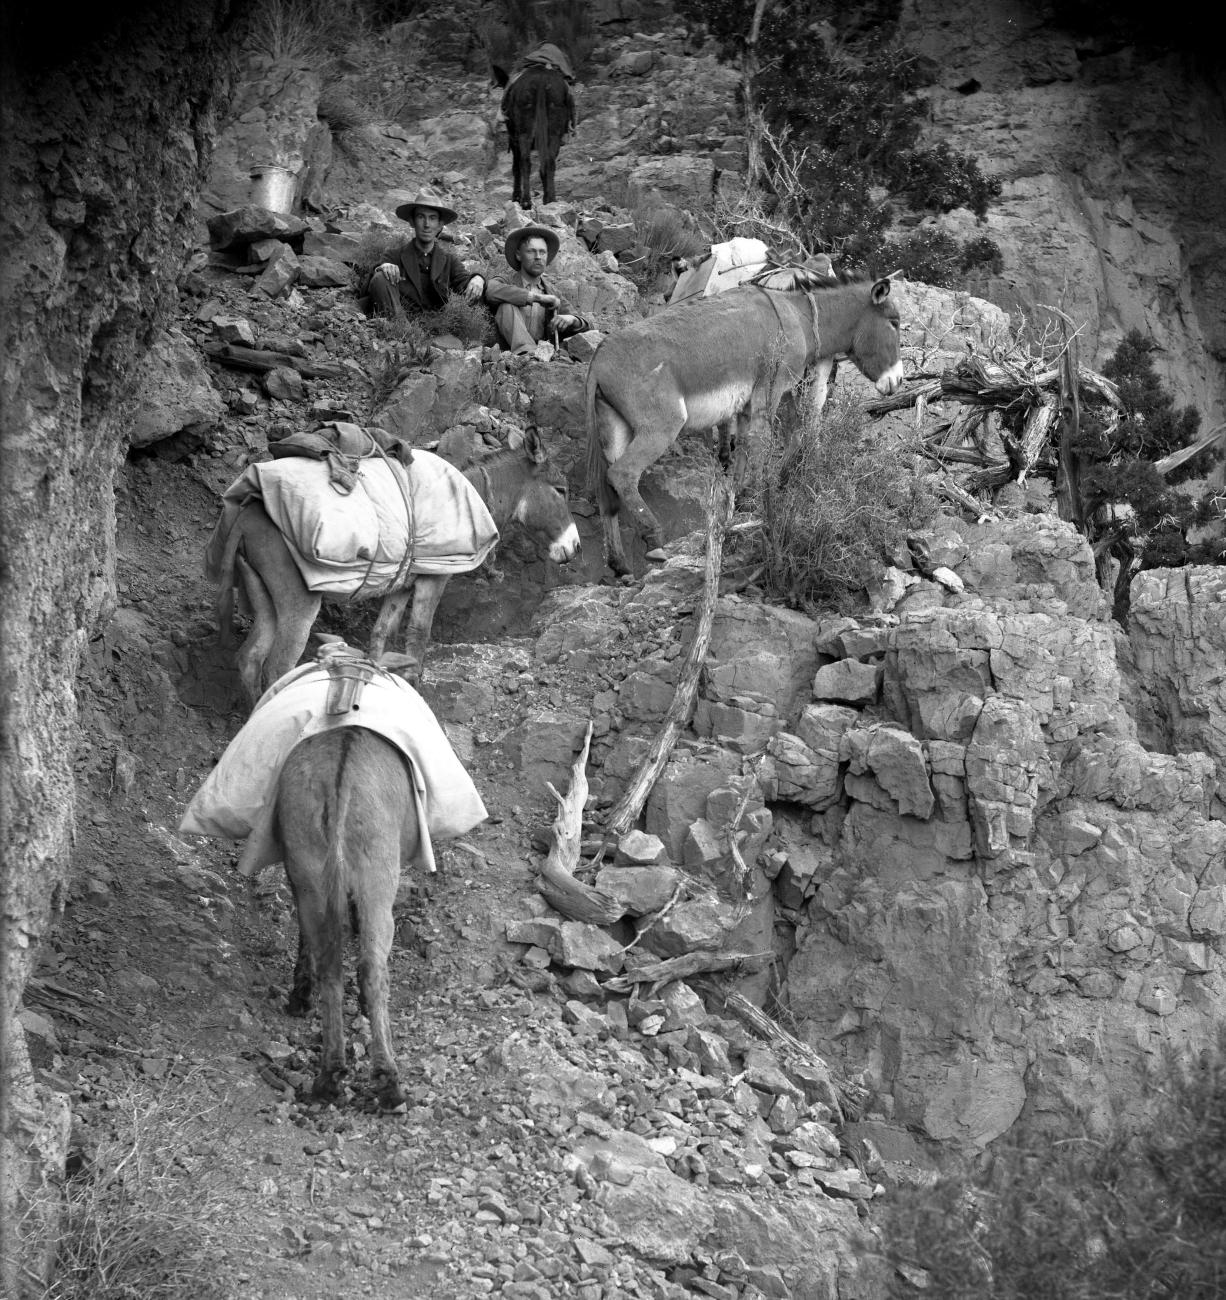 Sidney Foote and Walter Johnson, along with a few mules carrying equipment, pause to sit awhile before continuing to hike up a steep mountain incline.